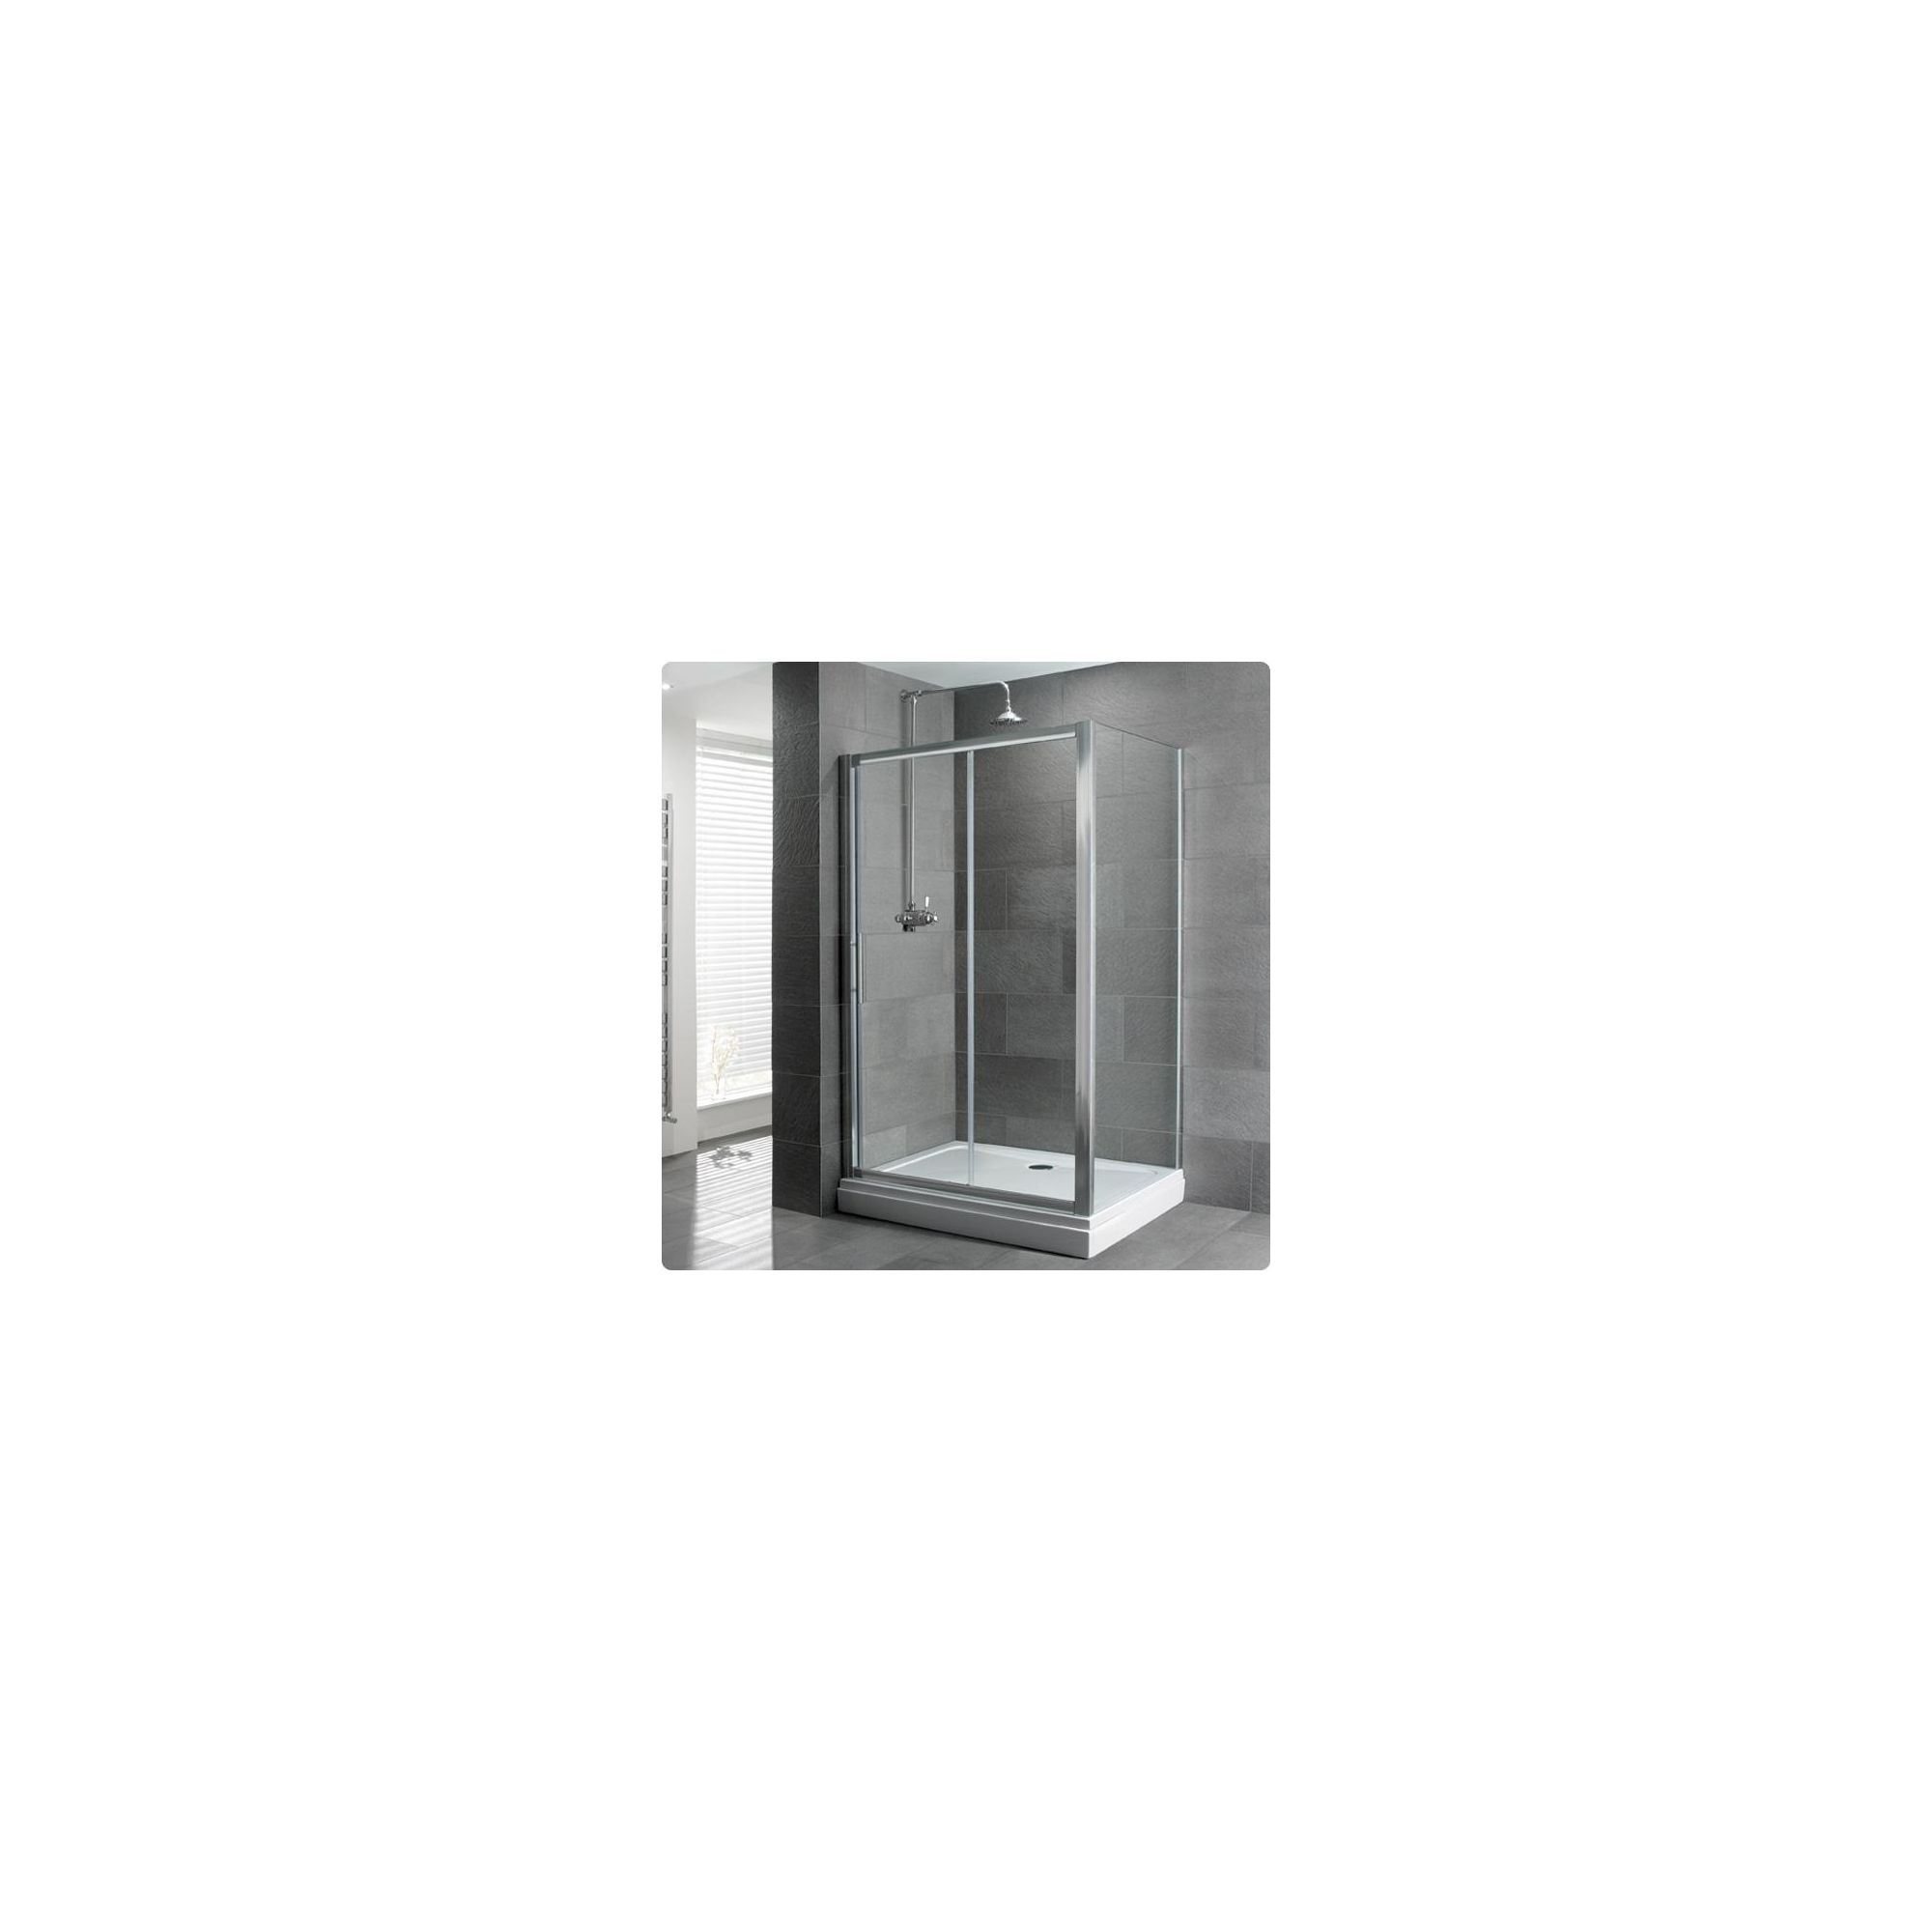 Duchy Select Silver Single Sliding Door Shower Enclosure, 1100mm x 900mm, Standard Tray, 6mm Glass at Tesco Direct